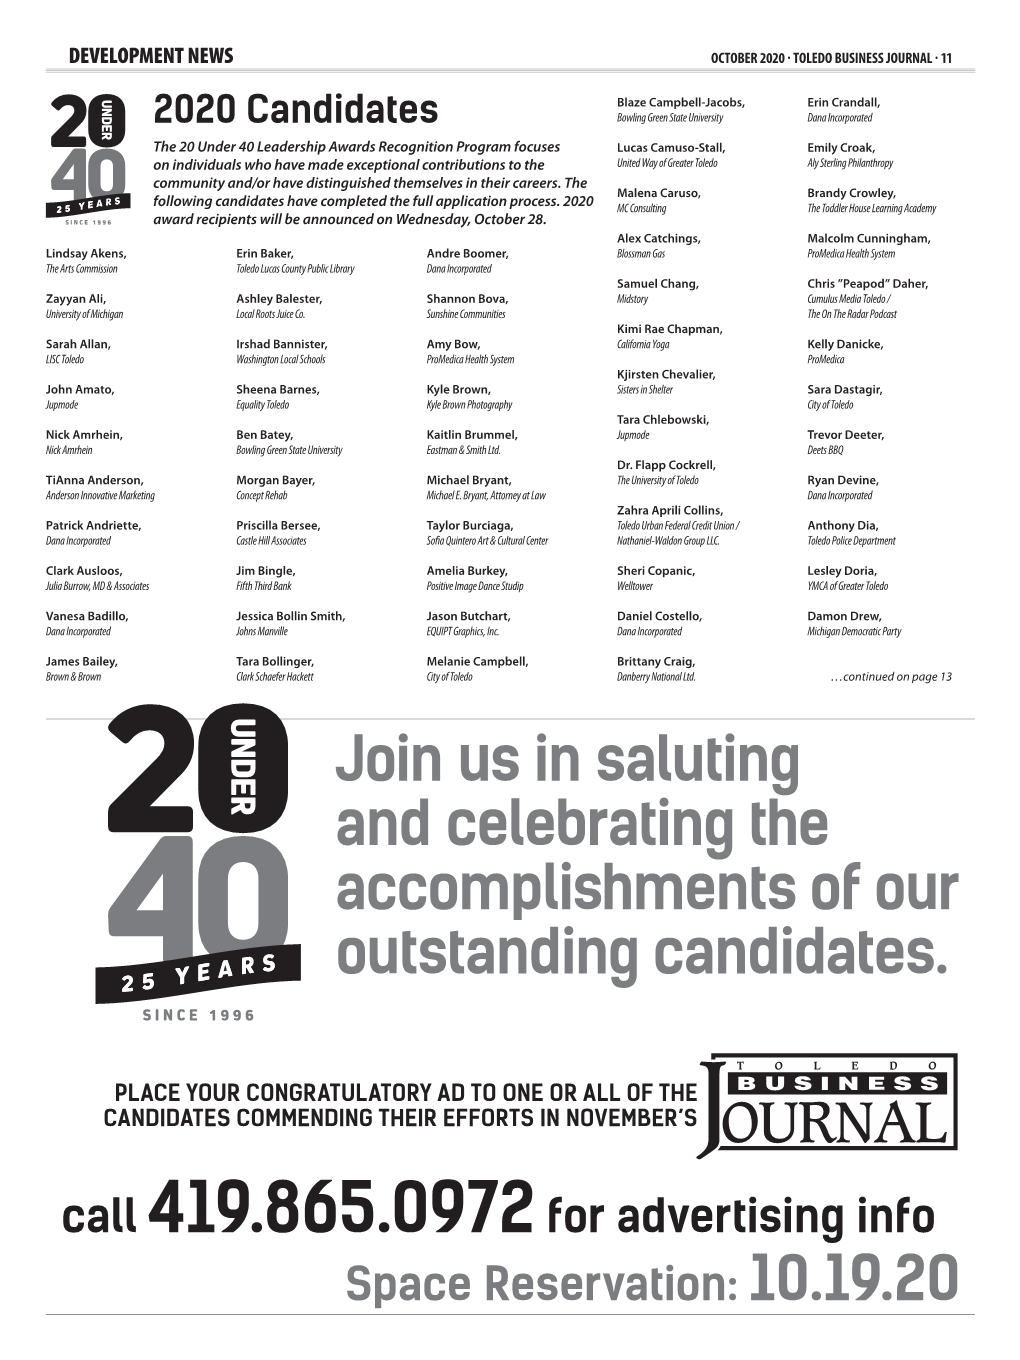 Join Us in Saluting and Celebrating the Accomplishments of Our Outstanding Candidates